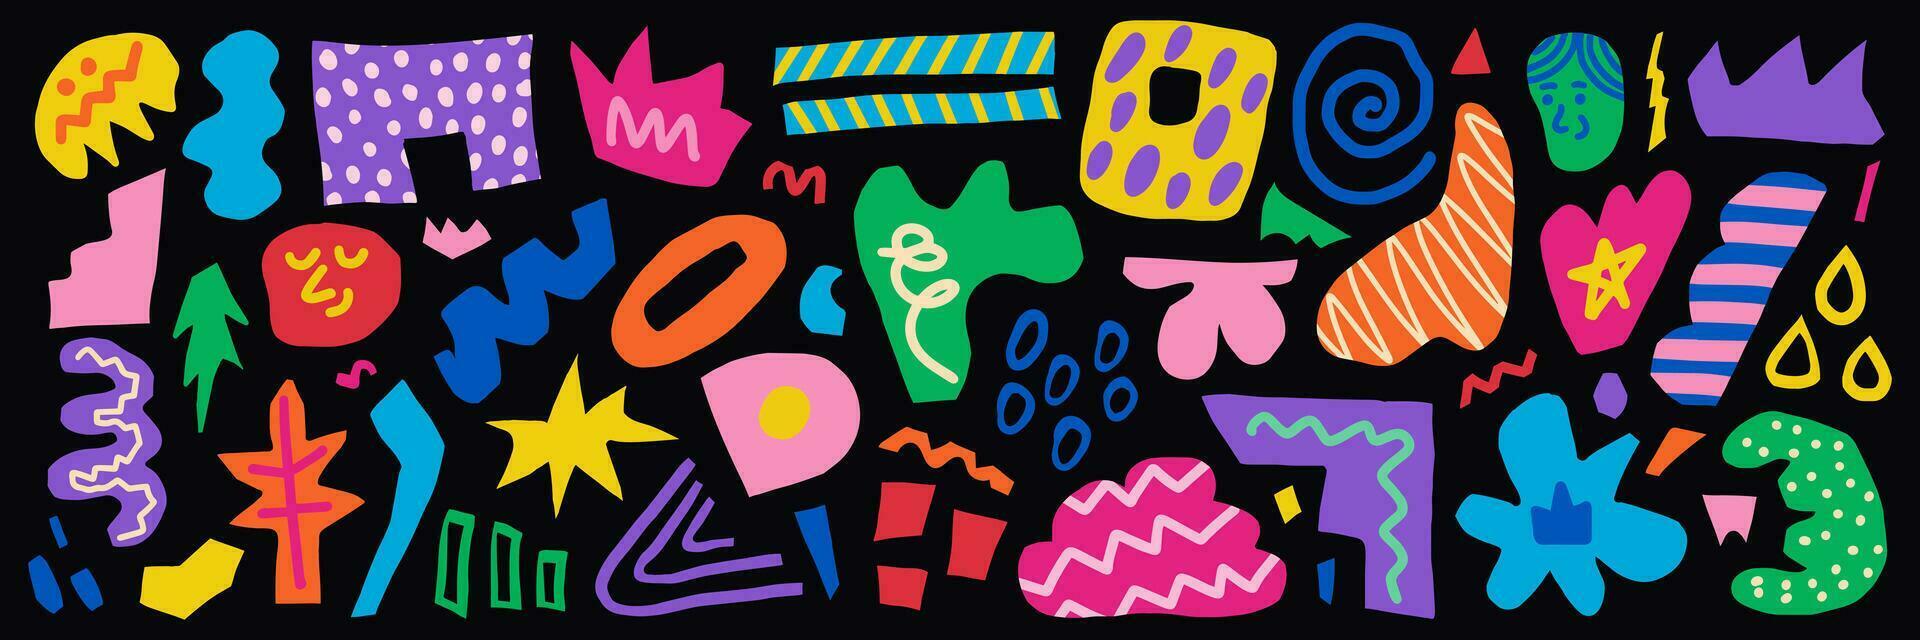 Abstract big set of colorful hand drawn various shapes, curls, forms and doodle objects. Modern trendy vector illustration